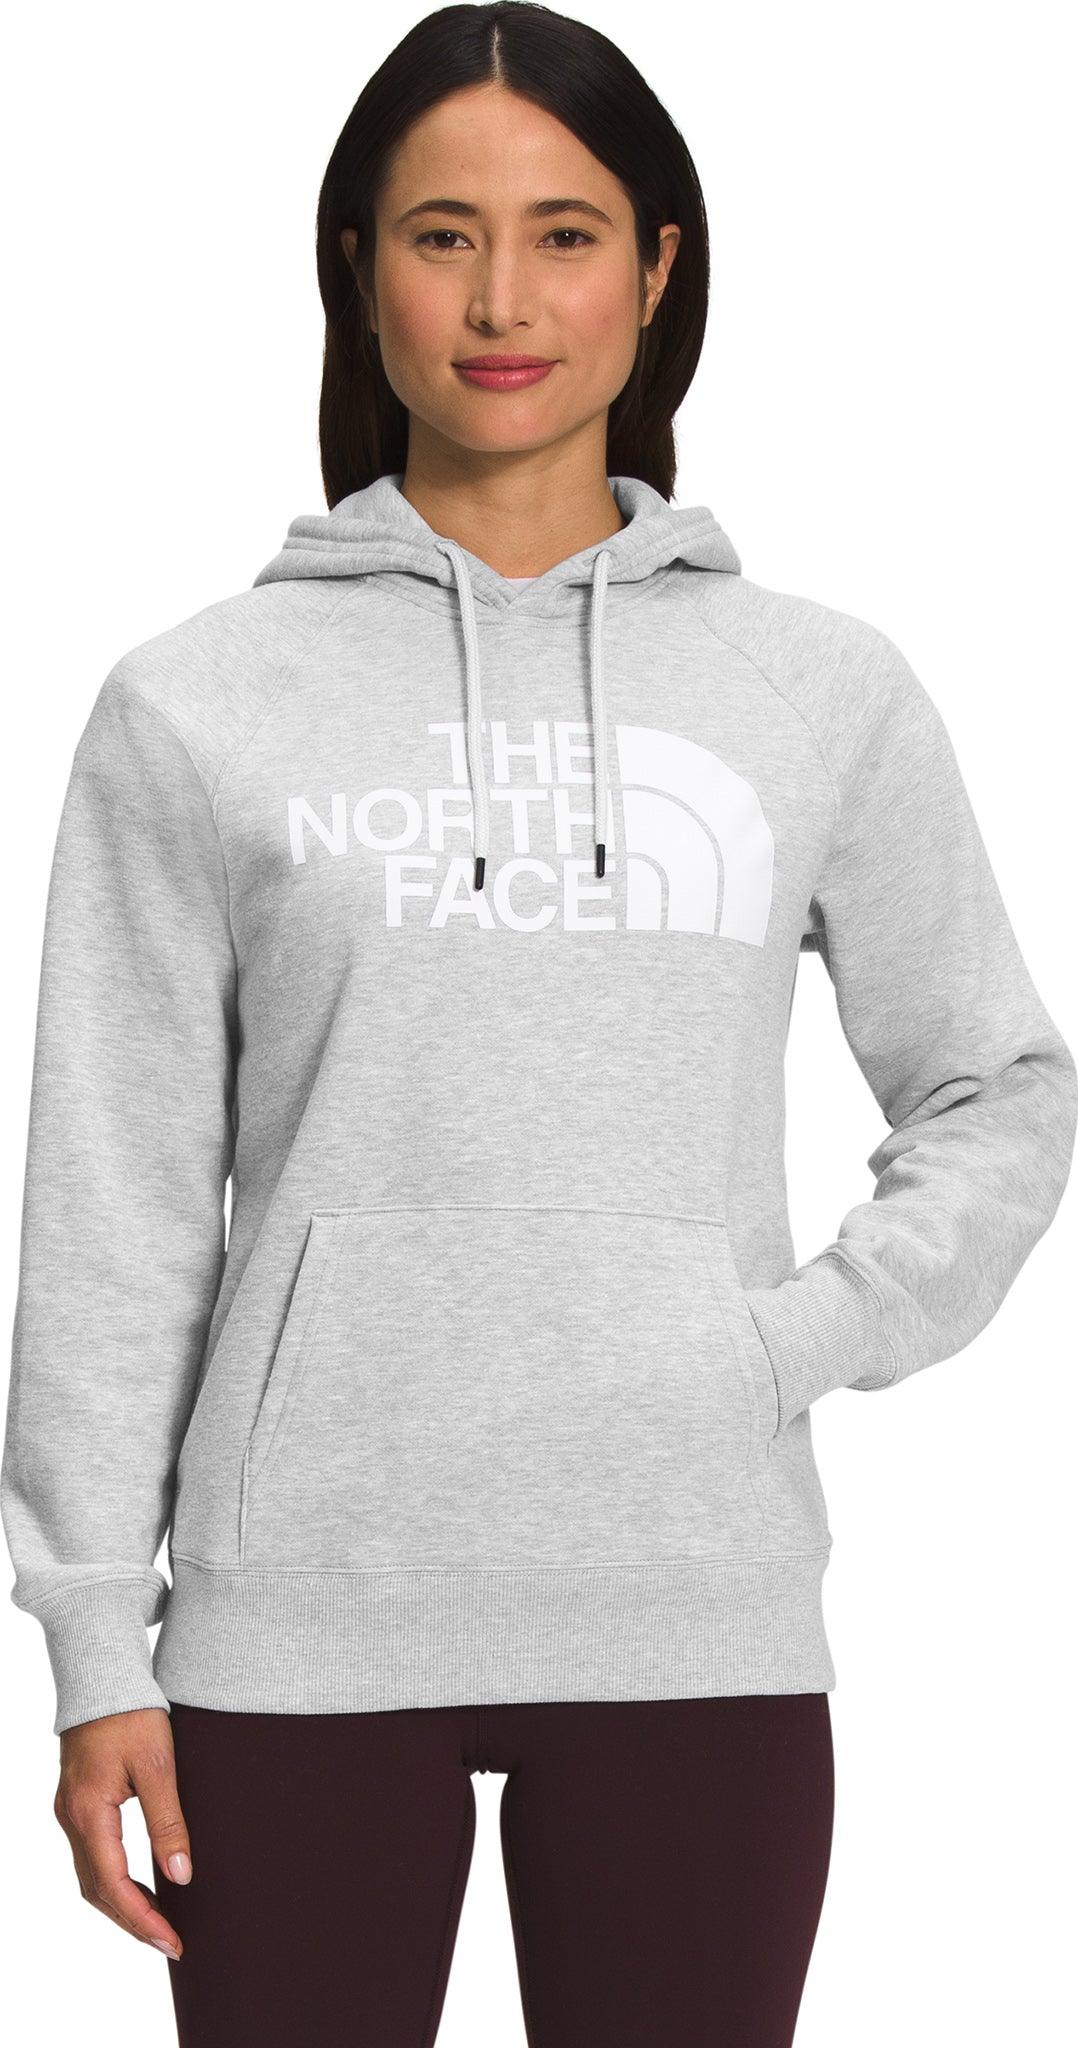 hoodie the north face femme